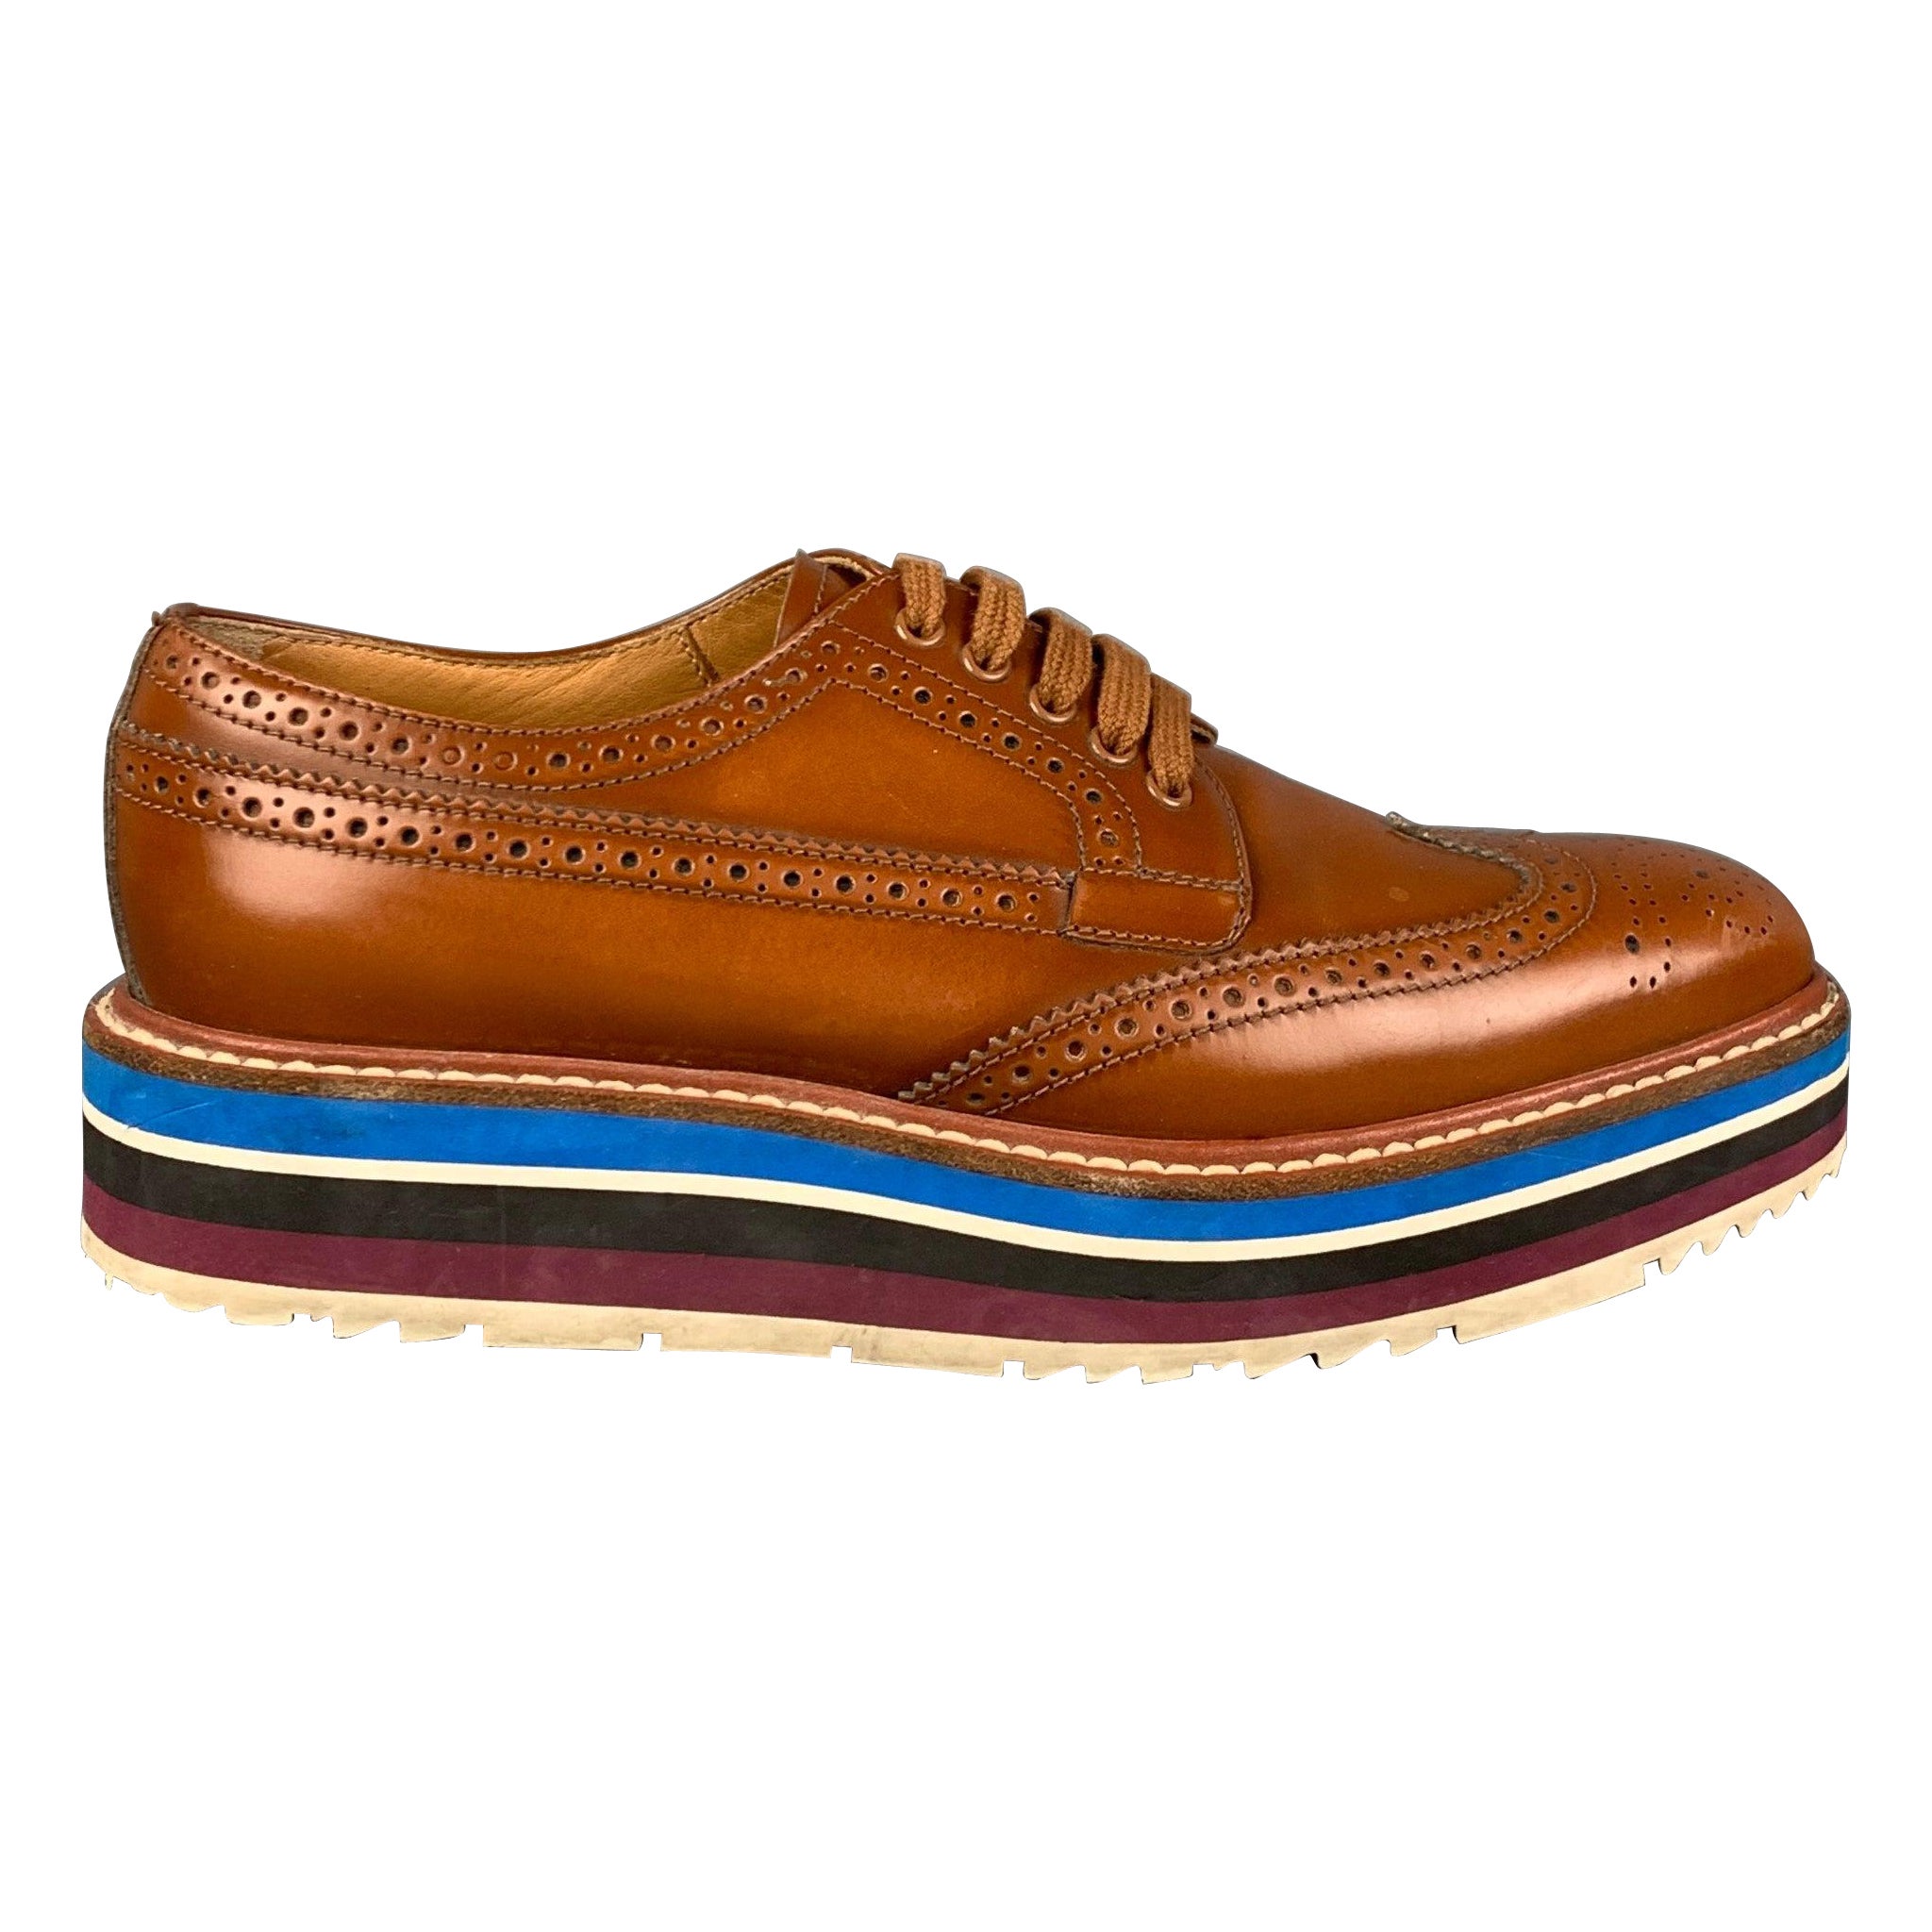 PRADA Size 6.5 Tan Leather Perforated Wingtip Shoes For Sale